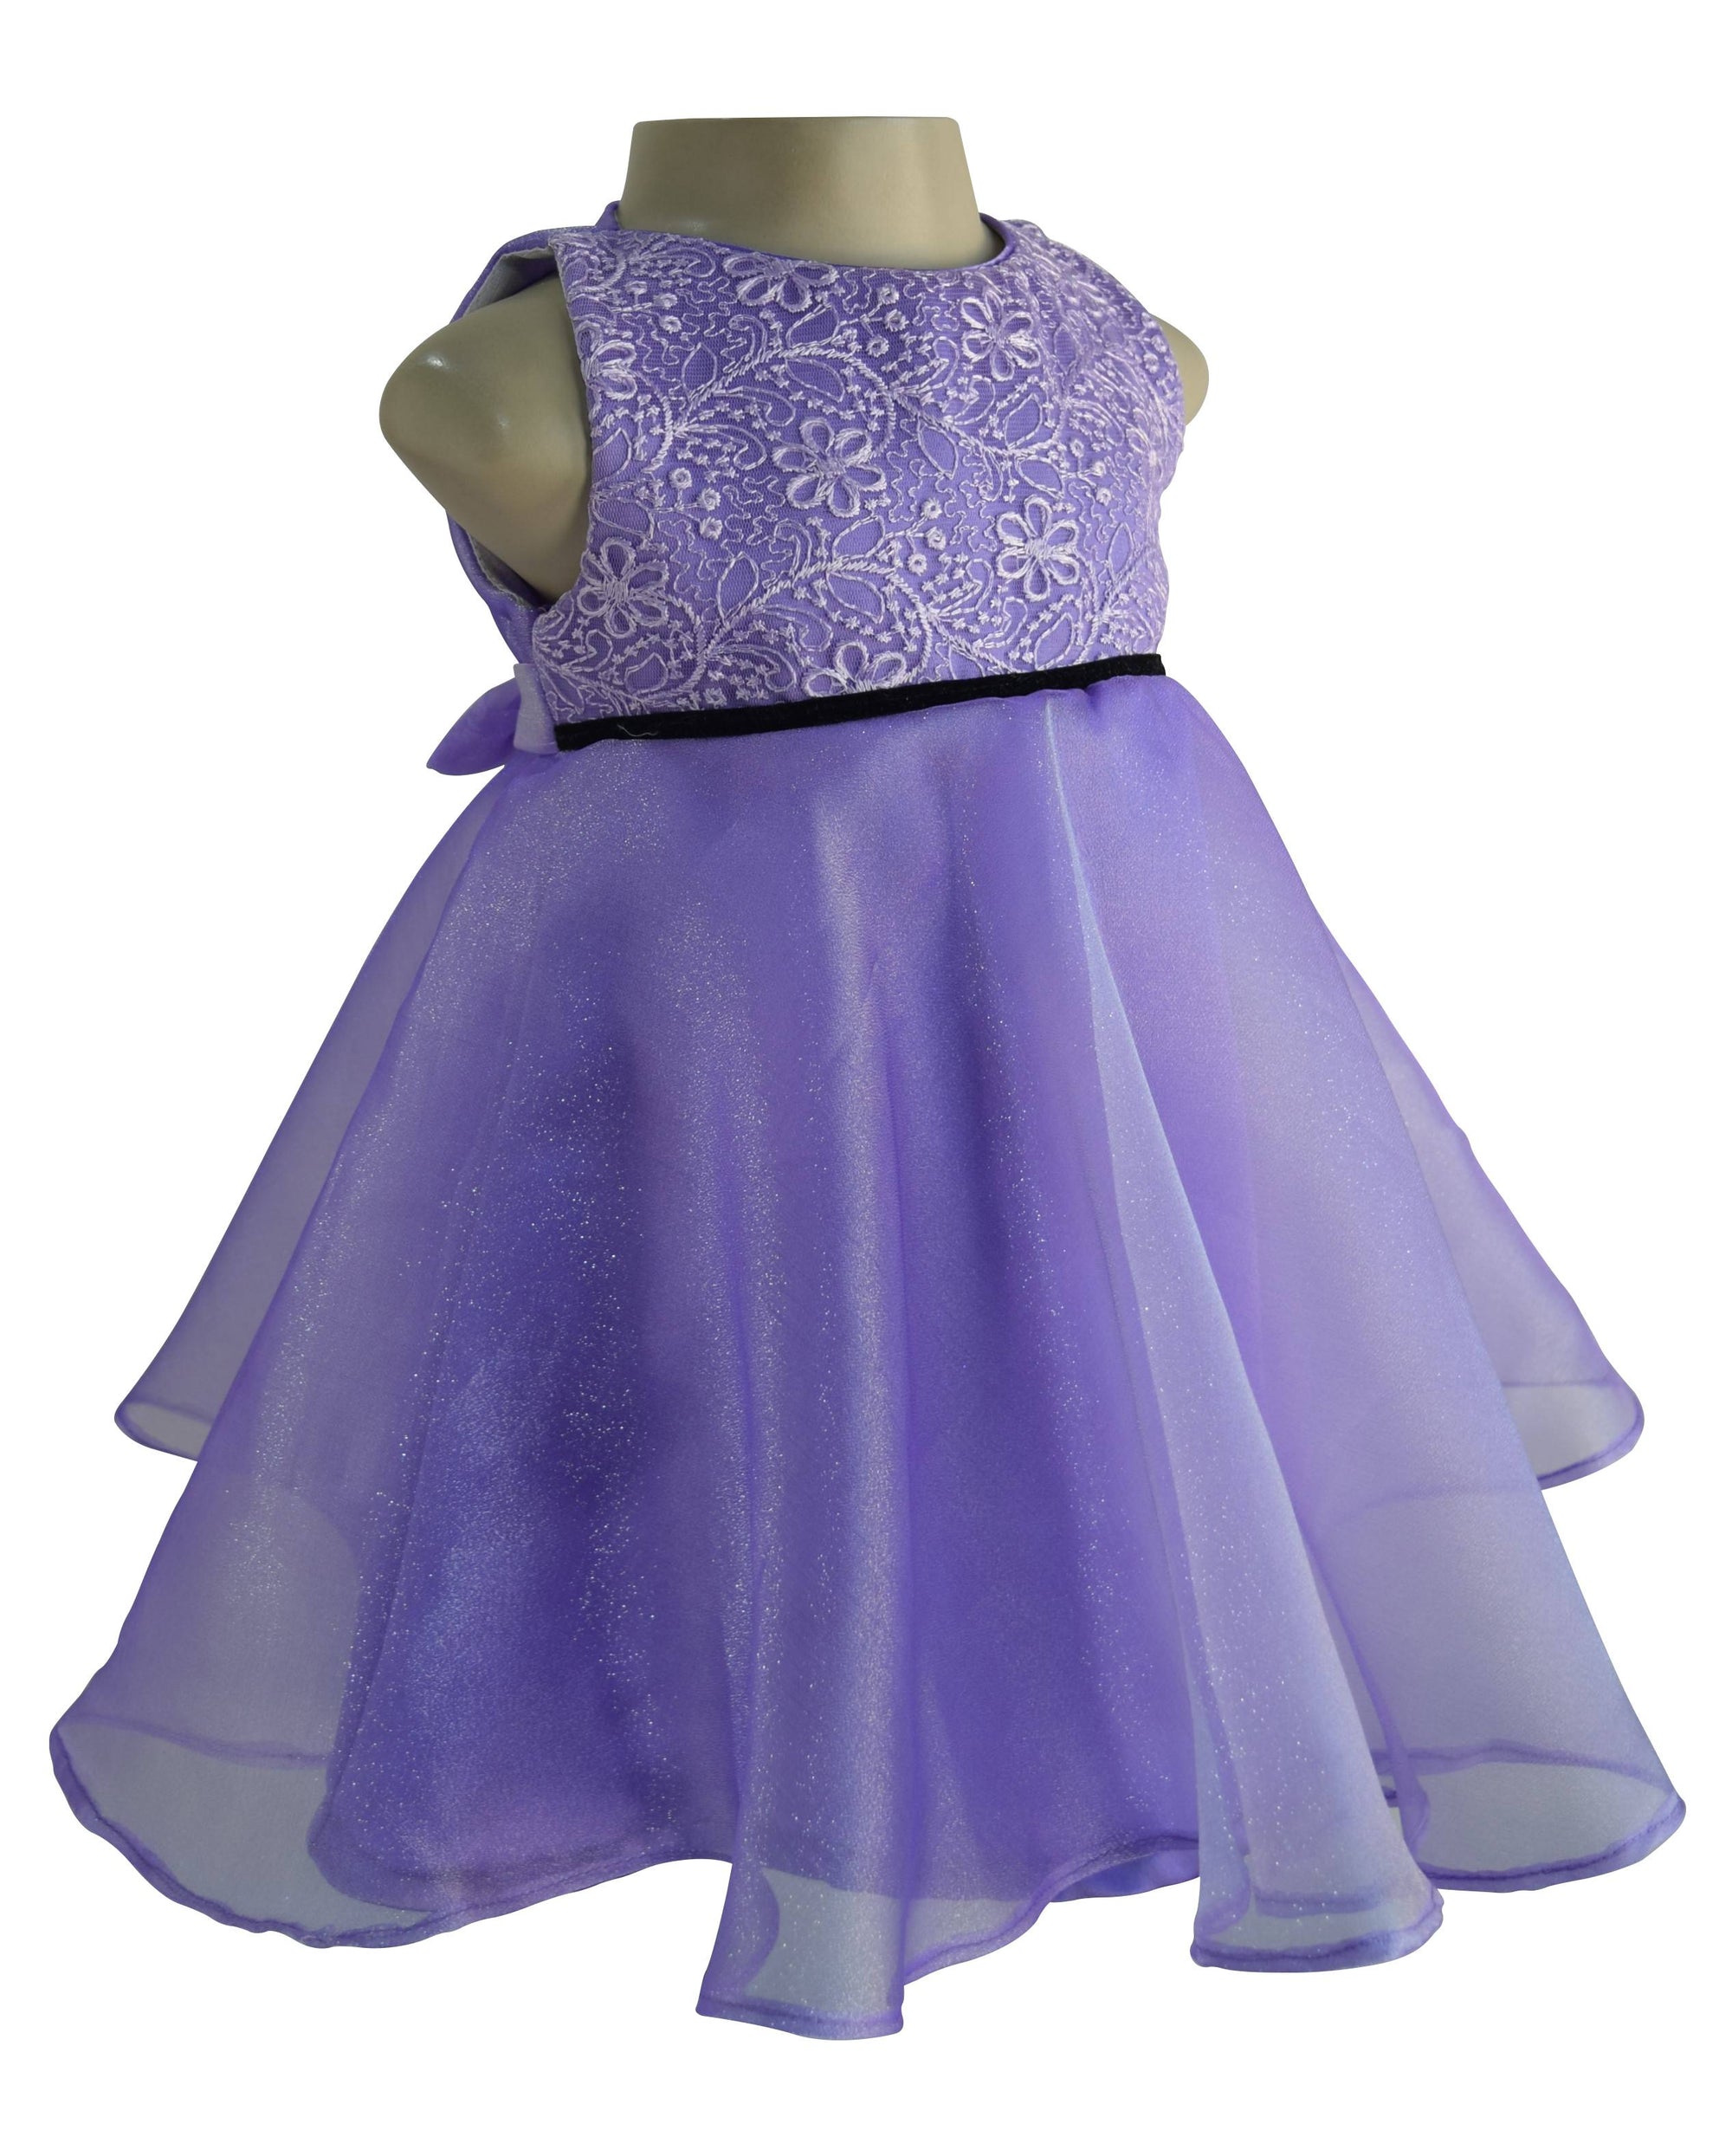 Baby Doll Dresses for Girls Online in India at Best Price